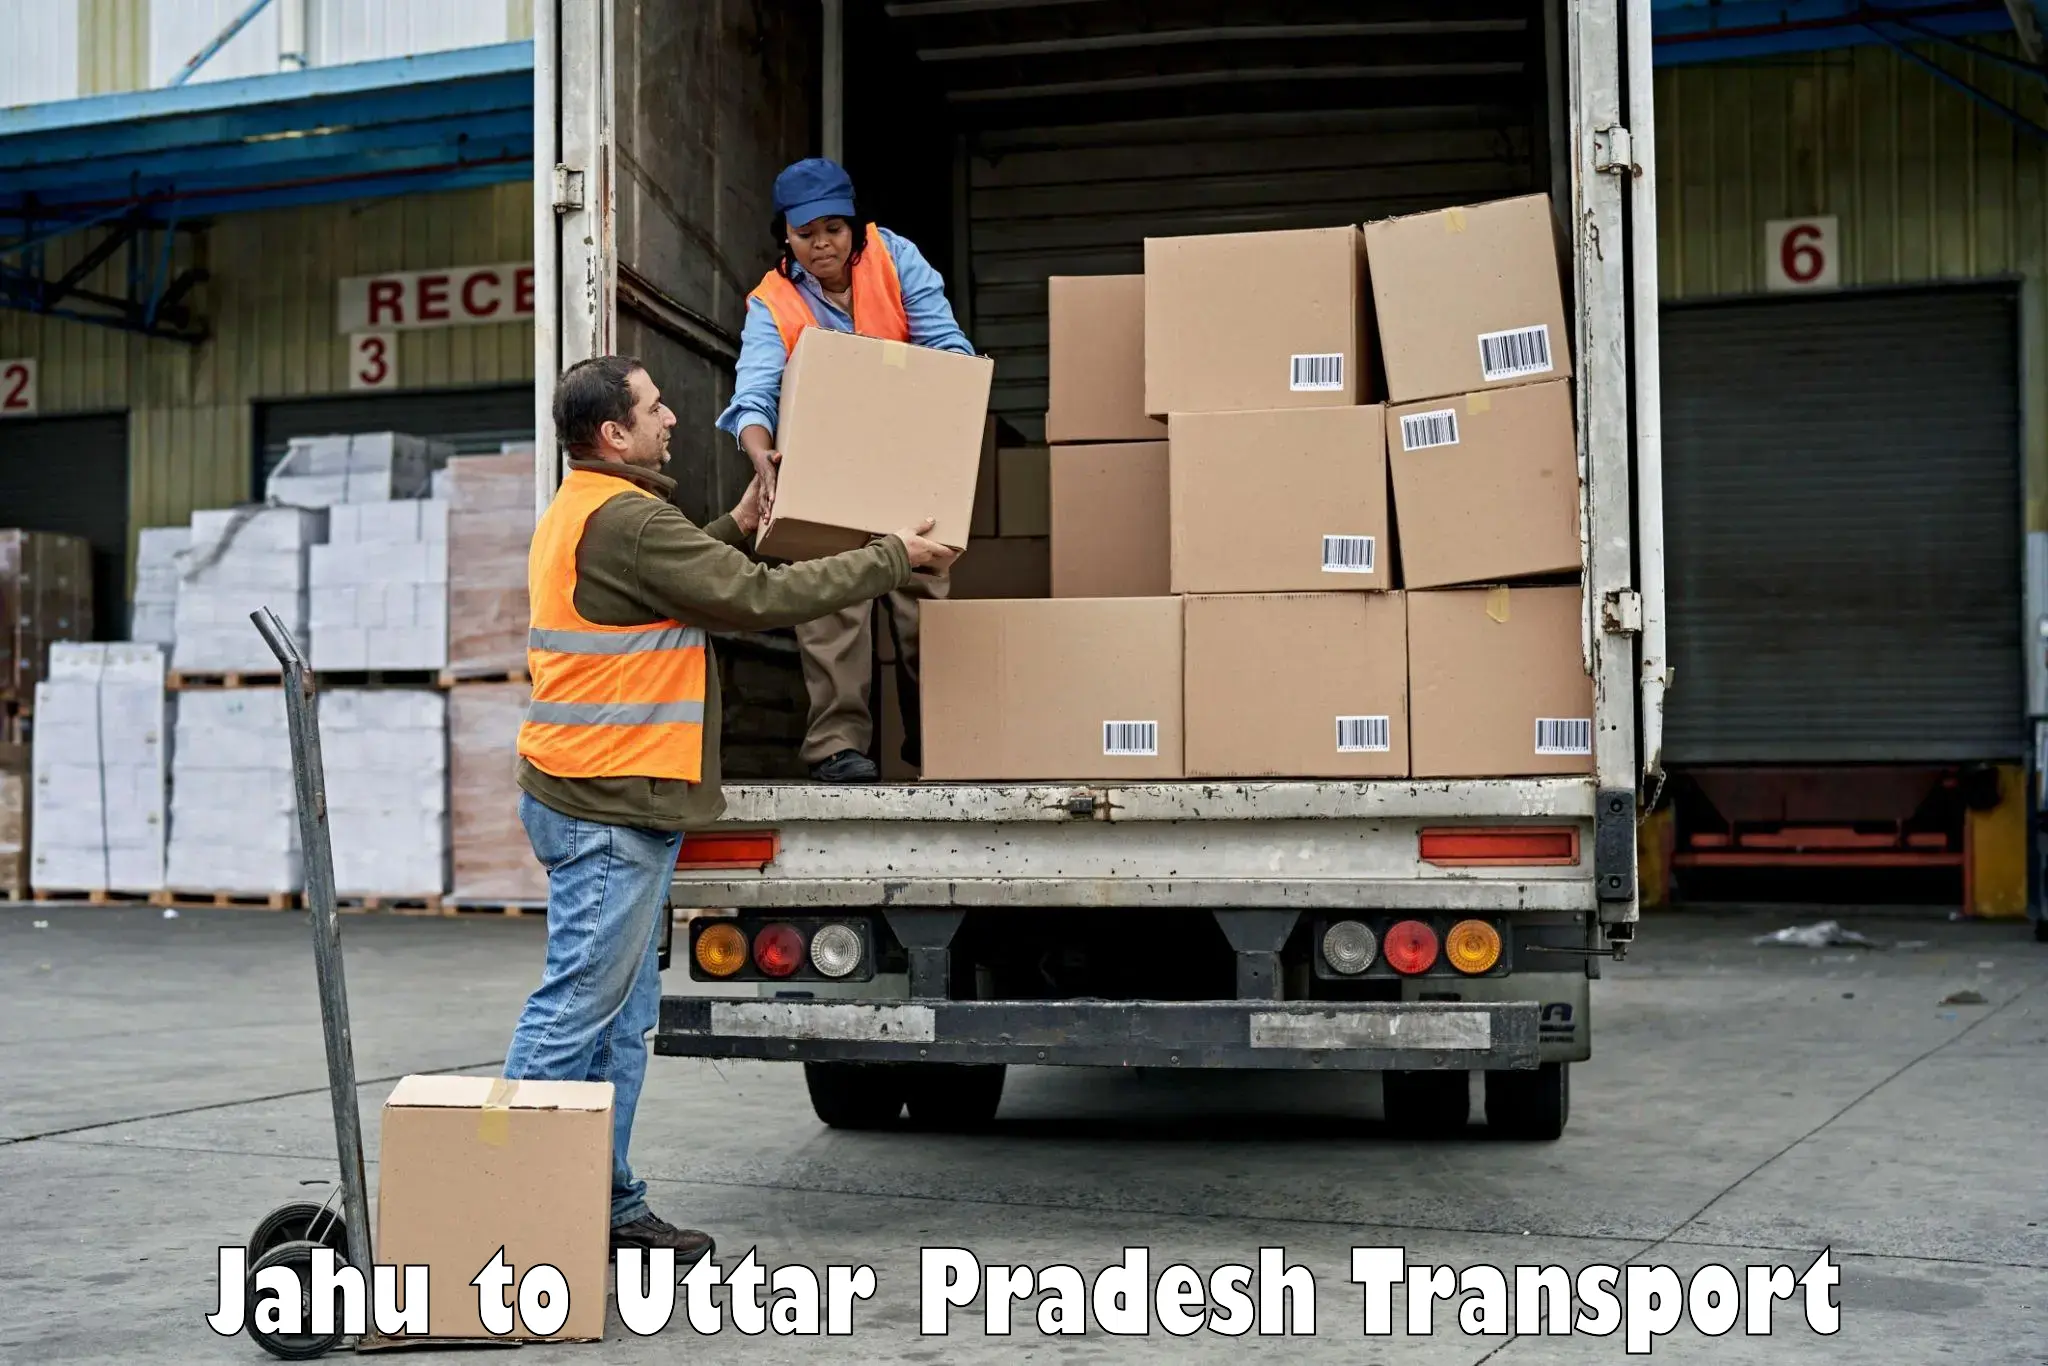 Part load transport service in India Jahu to Bisalpur